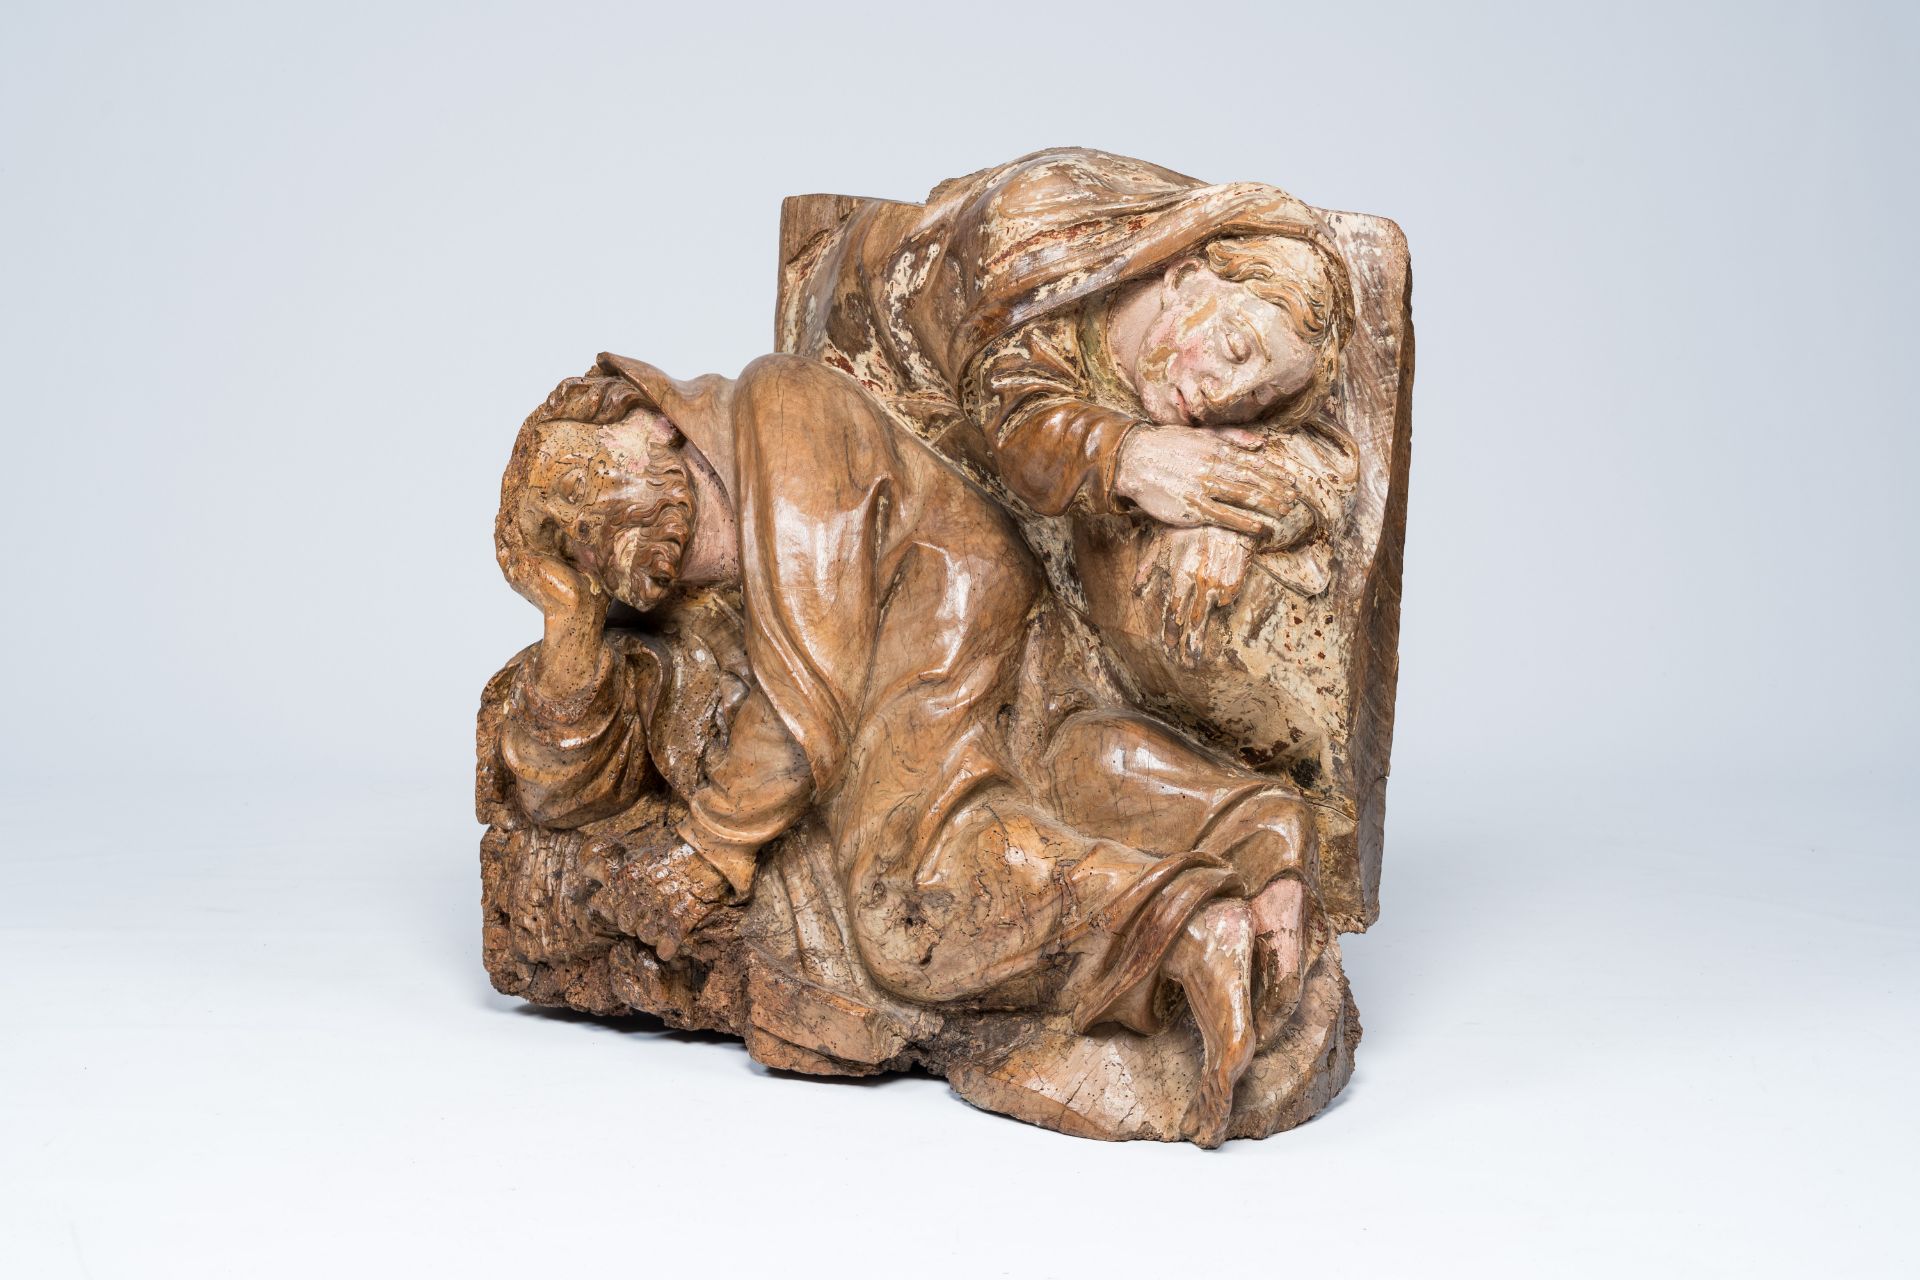 A probably German carved walnut group depicting the sleeping apostles Peter and John with remains of